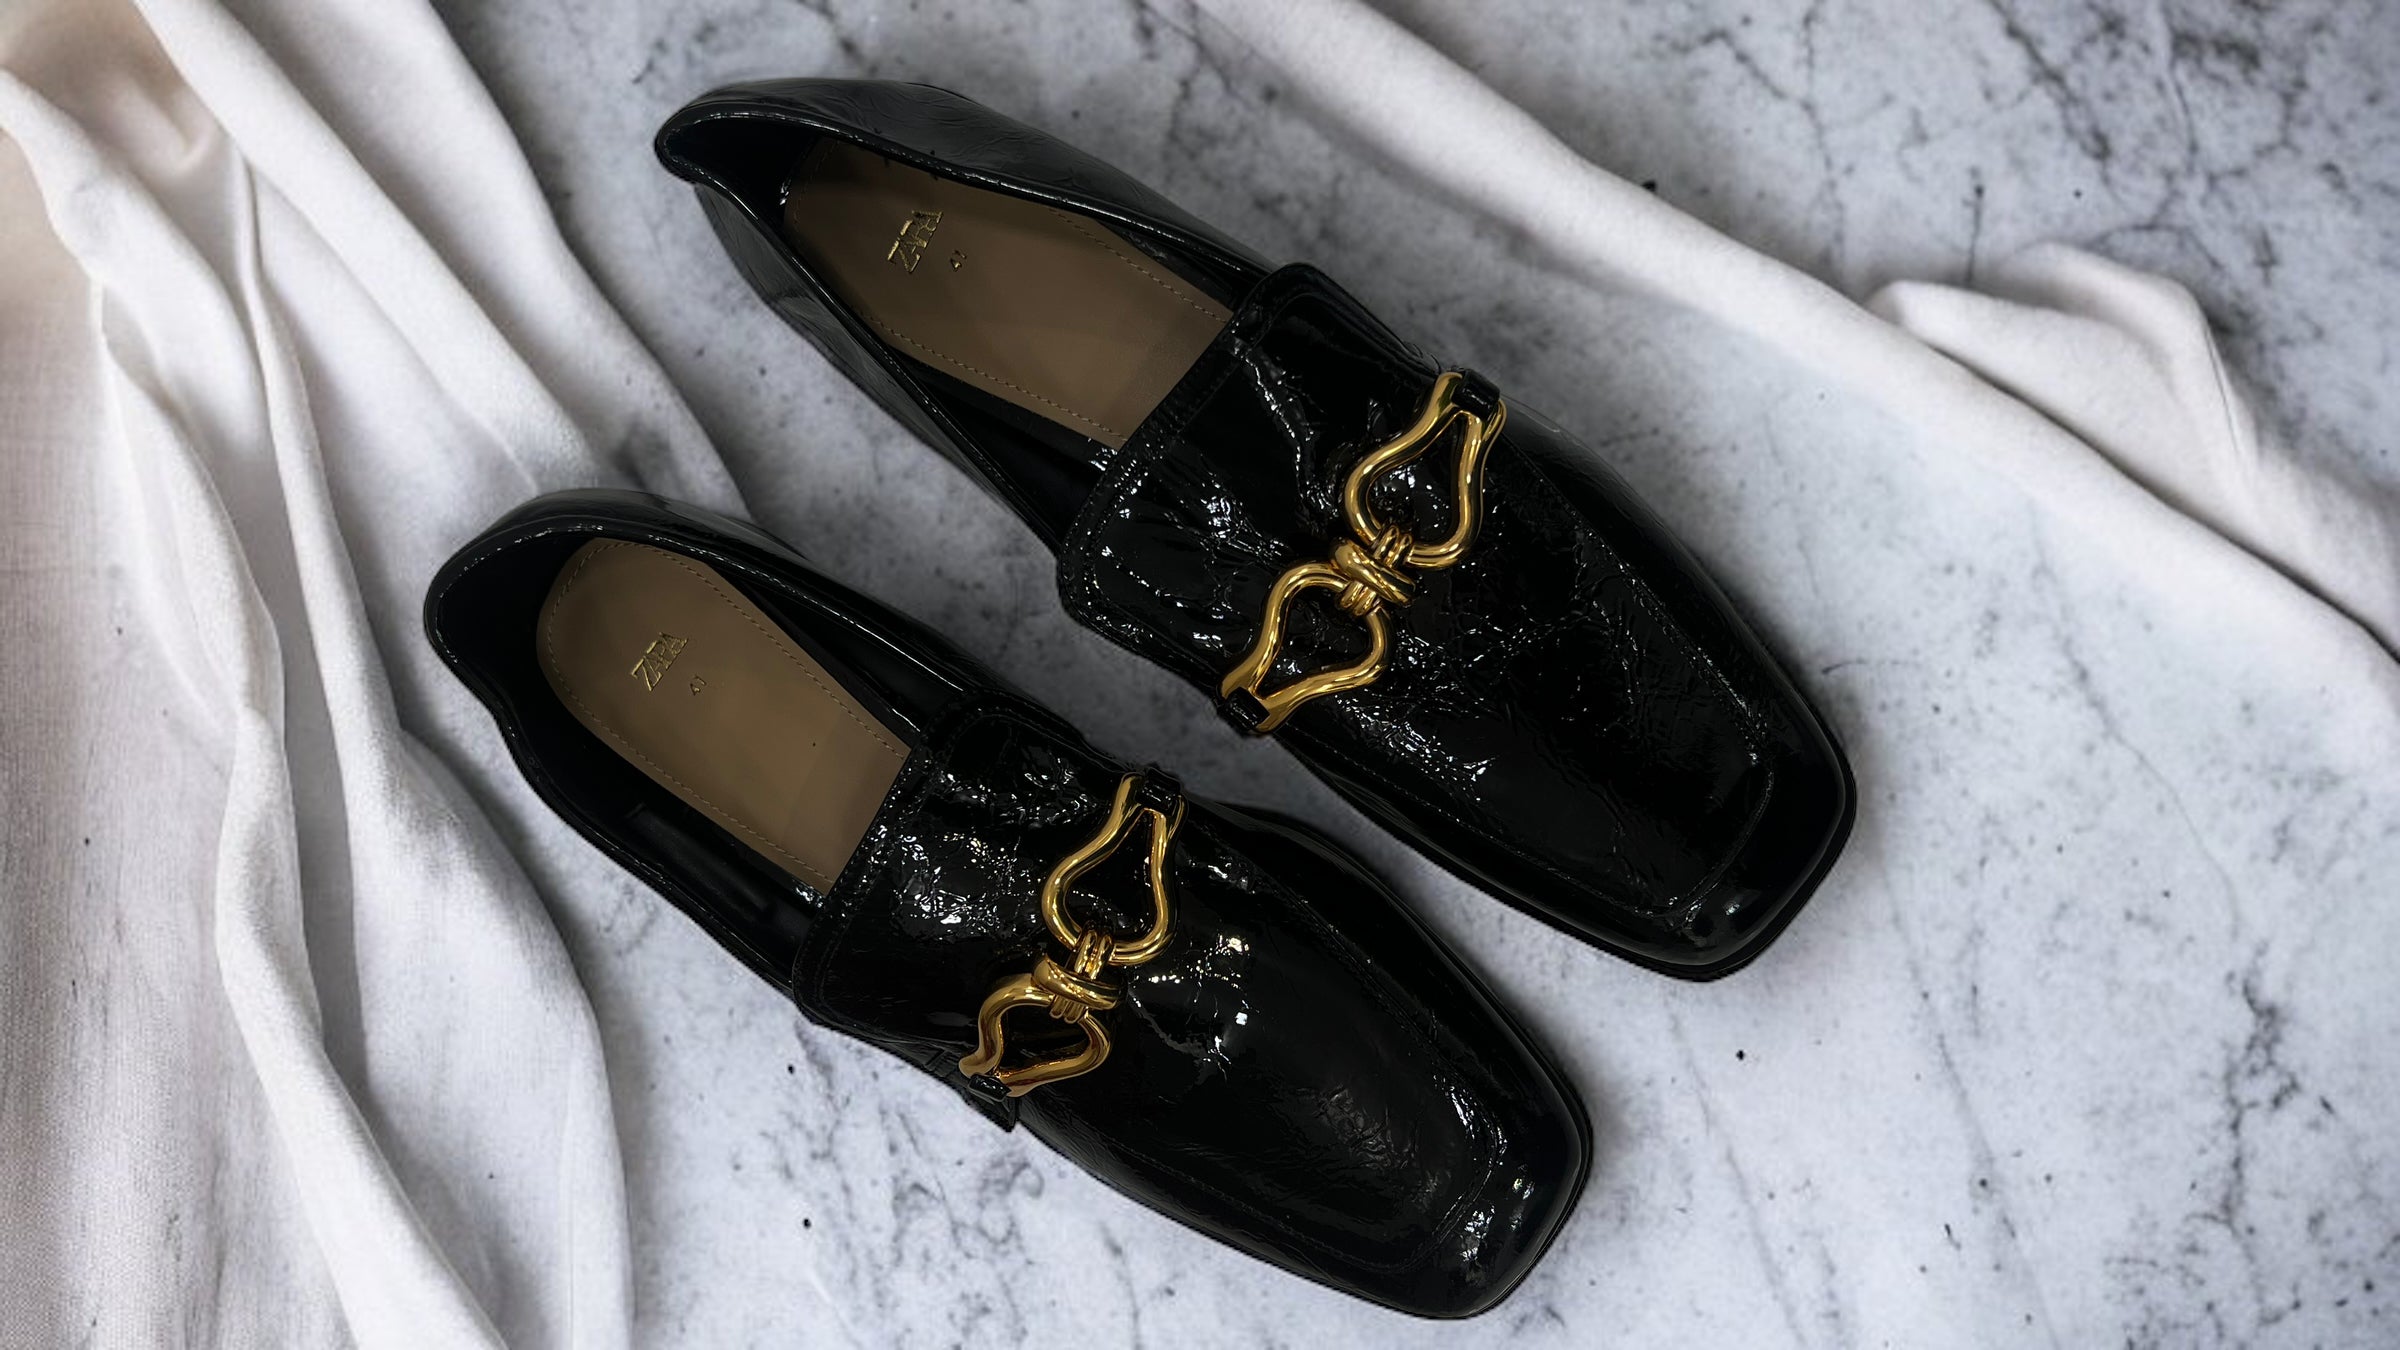 ZARA METAL DETAIL CRINKLE PATENT LEATHER LOAFERS IN BLACK